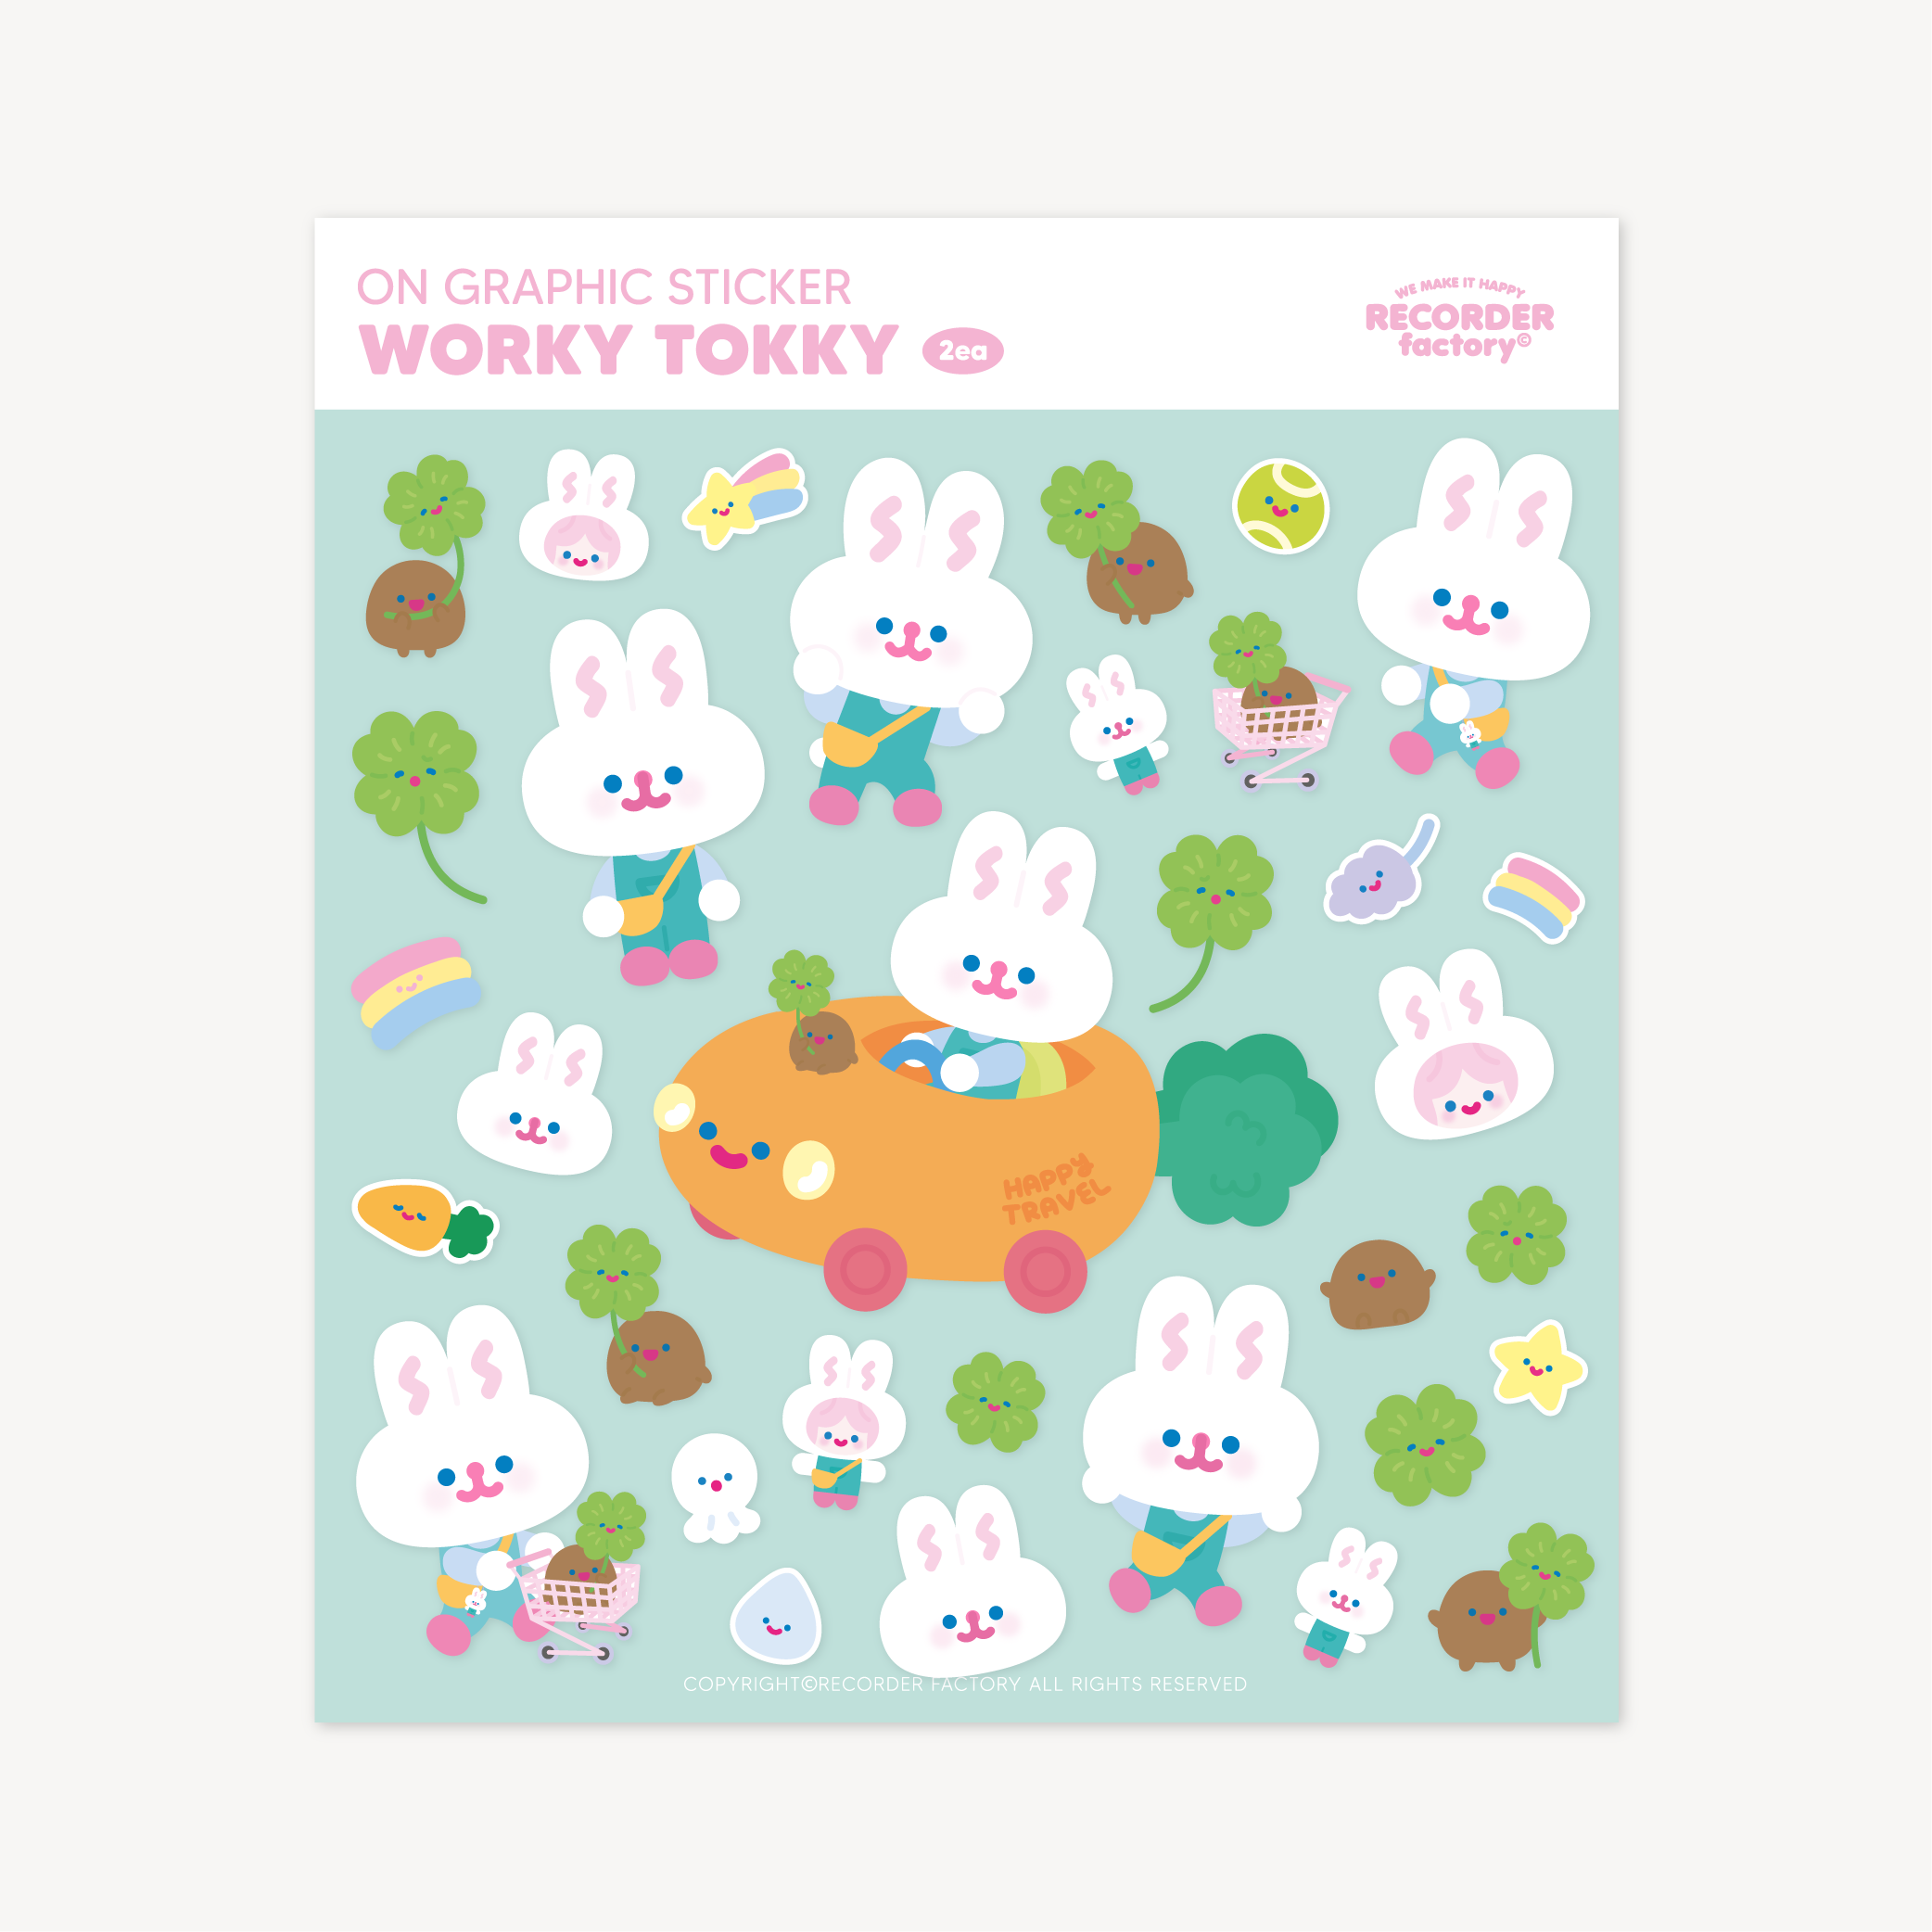 WORKY TOKKY ON GRAPHIC STICKER